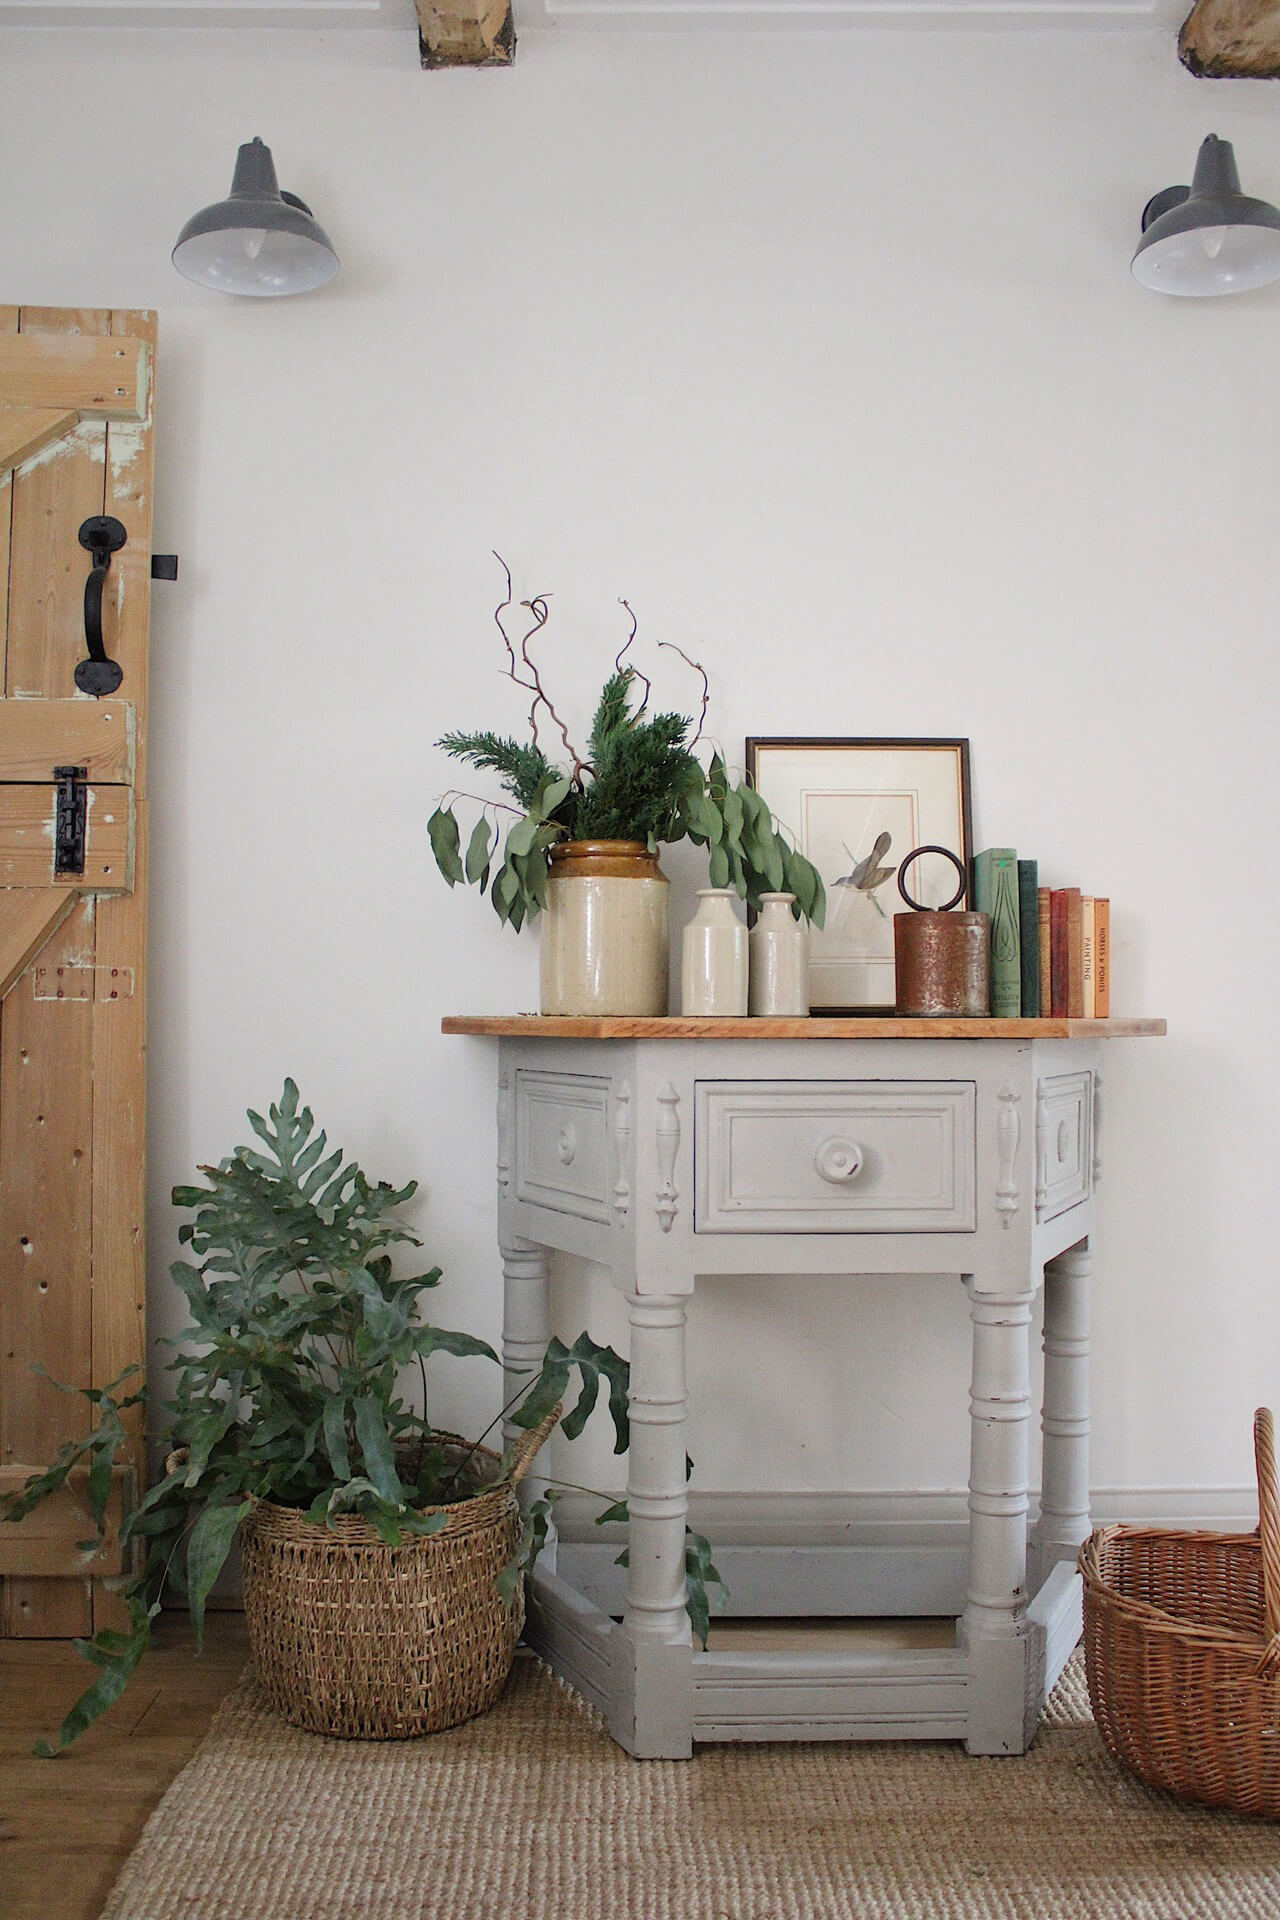 Home tour with Rachel Ashfield of @the_old_cottage - an old painted vintage table, with vintage decorative items, baskets and plants.